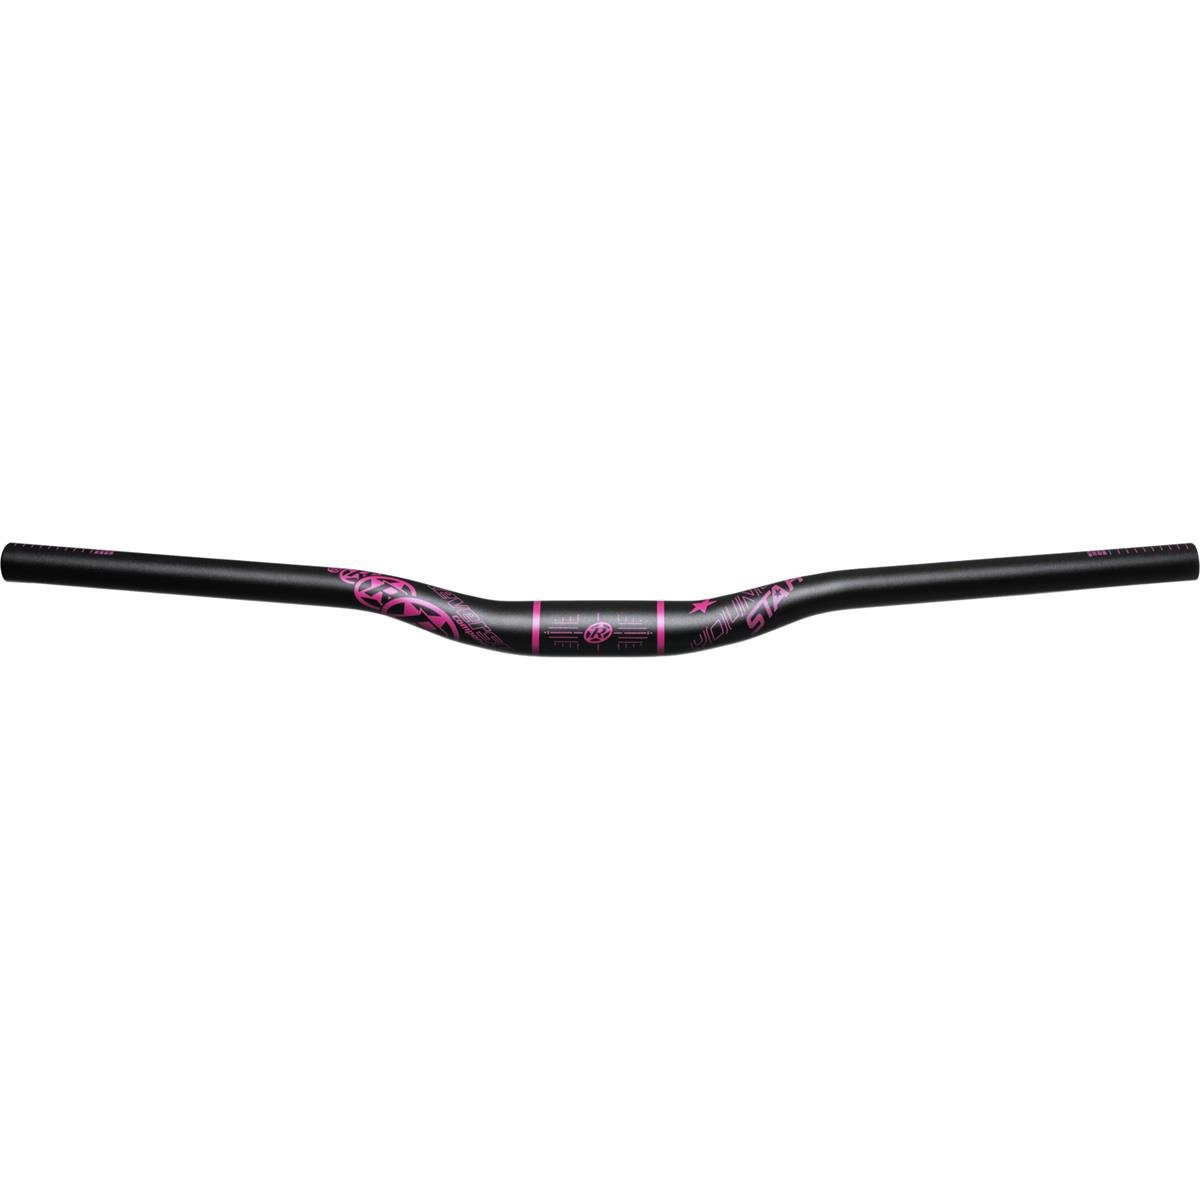 Reverse Components Kids MTB Handlebar Youngstar Black/Candy, 31.8 x 660 mm